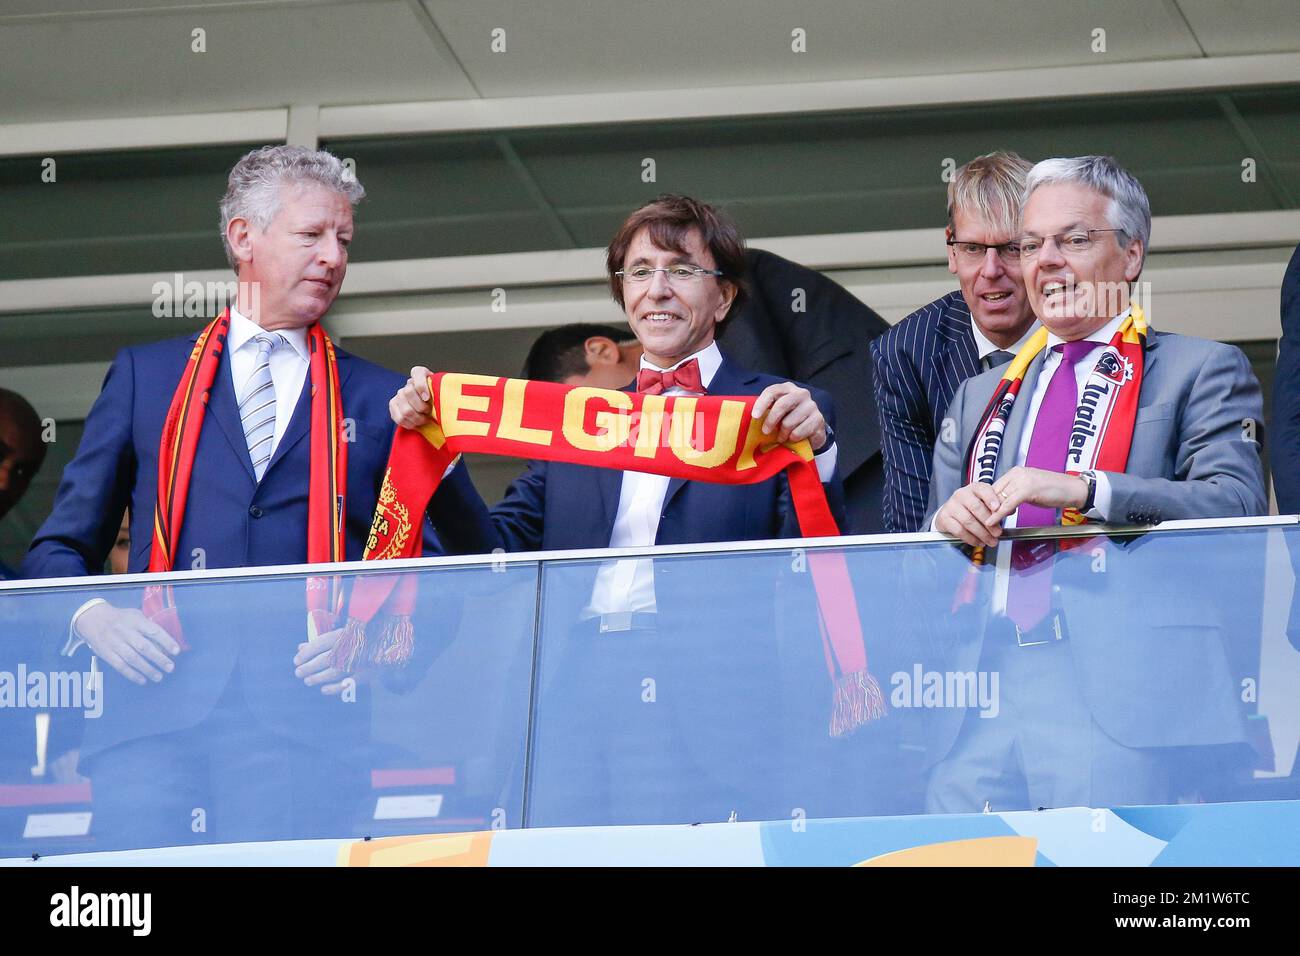 Outgoing Vice-Minister and Defence Minister Pieter De Crem, Outgoing Prime Minister Elio Di Rupo and Outgoing Vice-Prime Minister and Foreign Minister Didier Reynders pictured during the quarter final match between Belgian national soccer team Red Devils and Argentina, in Estadio Nacional Mane Garrincha, in Brasilia, Brazil, during the 2014 FIFA World Cup, Saturday 05 July 2014. BELGA PHOTO BRUNO FAHY Stock Photo